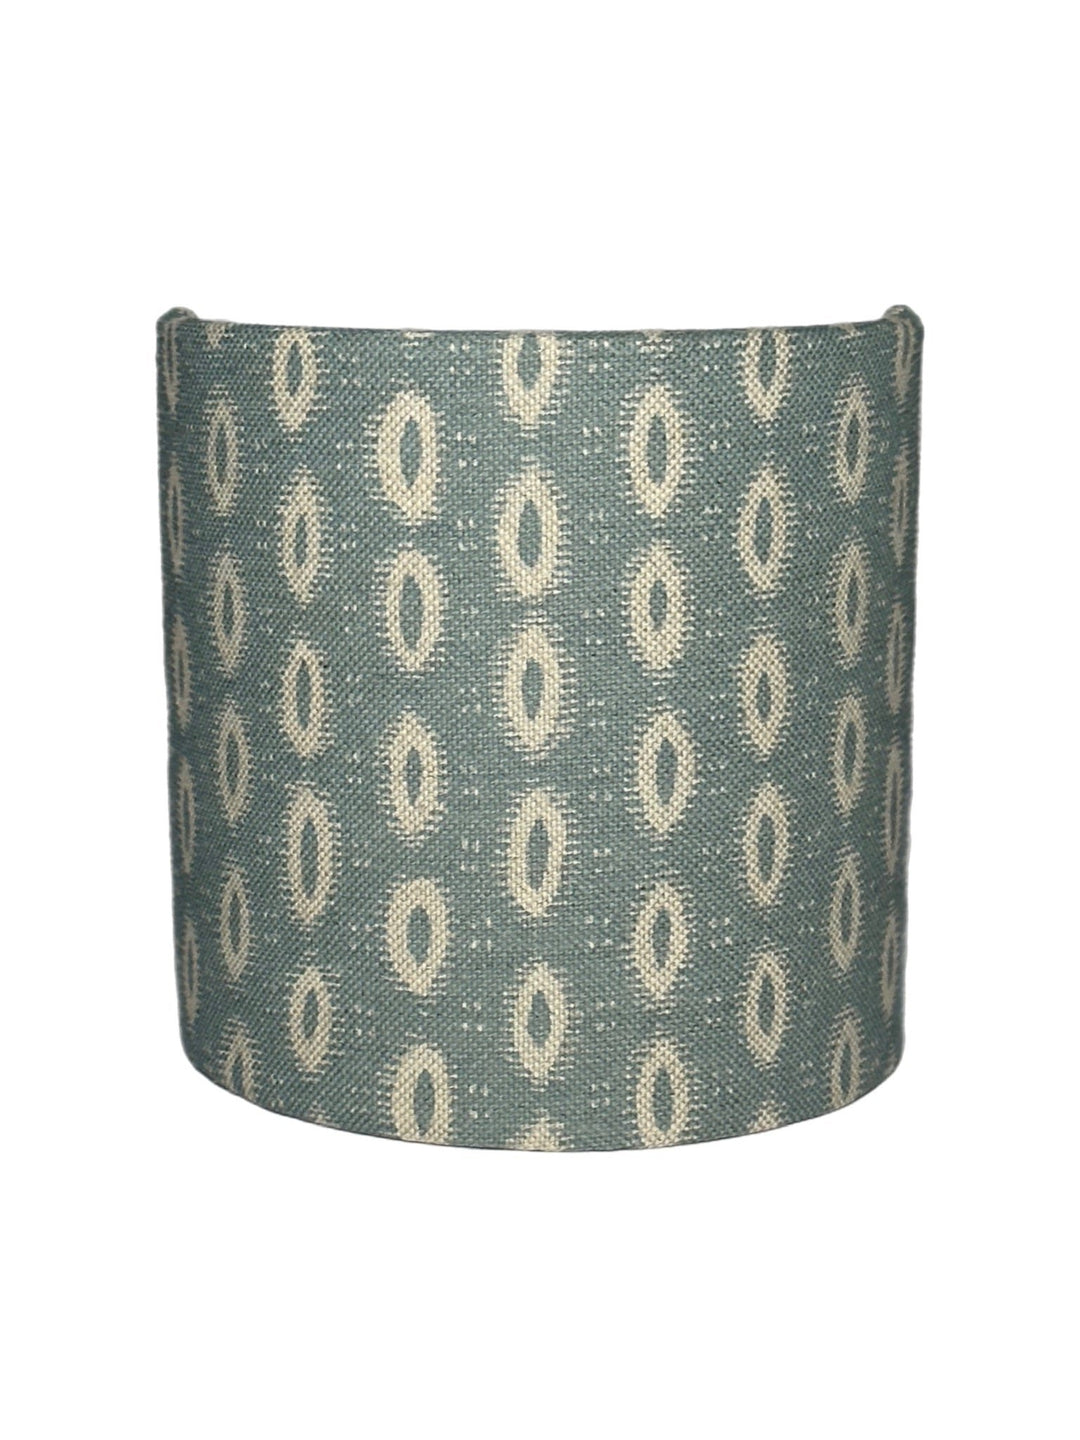 Custom Sconce Lamp Shade made with - 5" Half Drum with Candle Clip (12 shades in stock) - Lux Lamp Shades